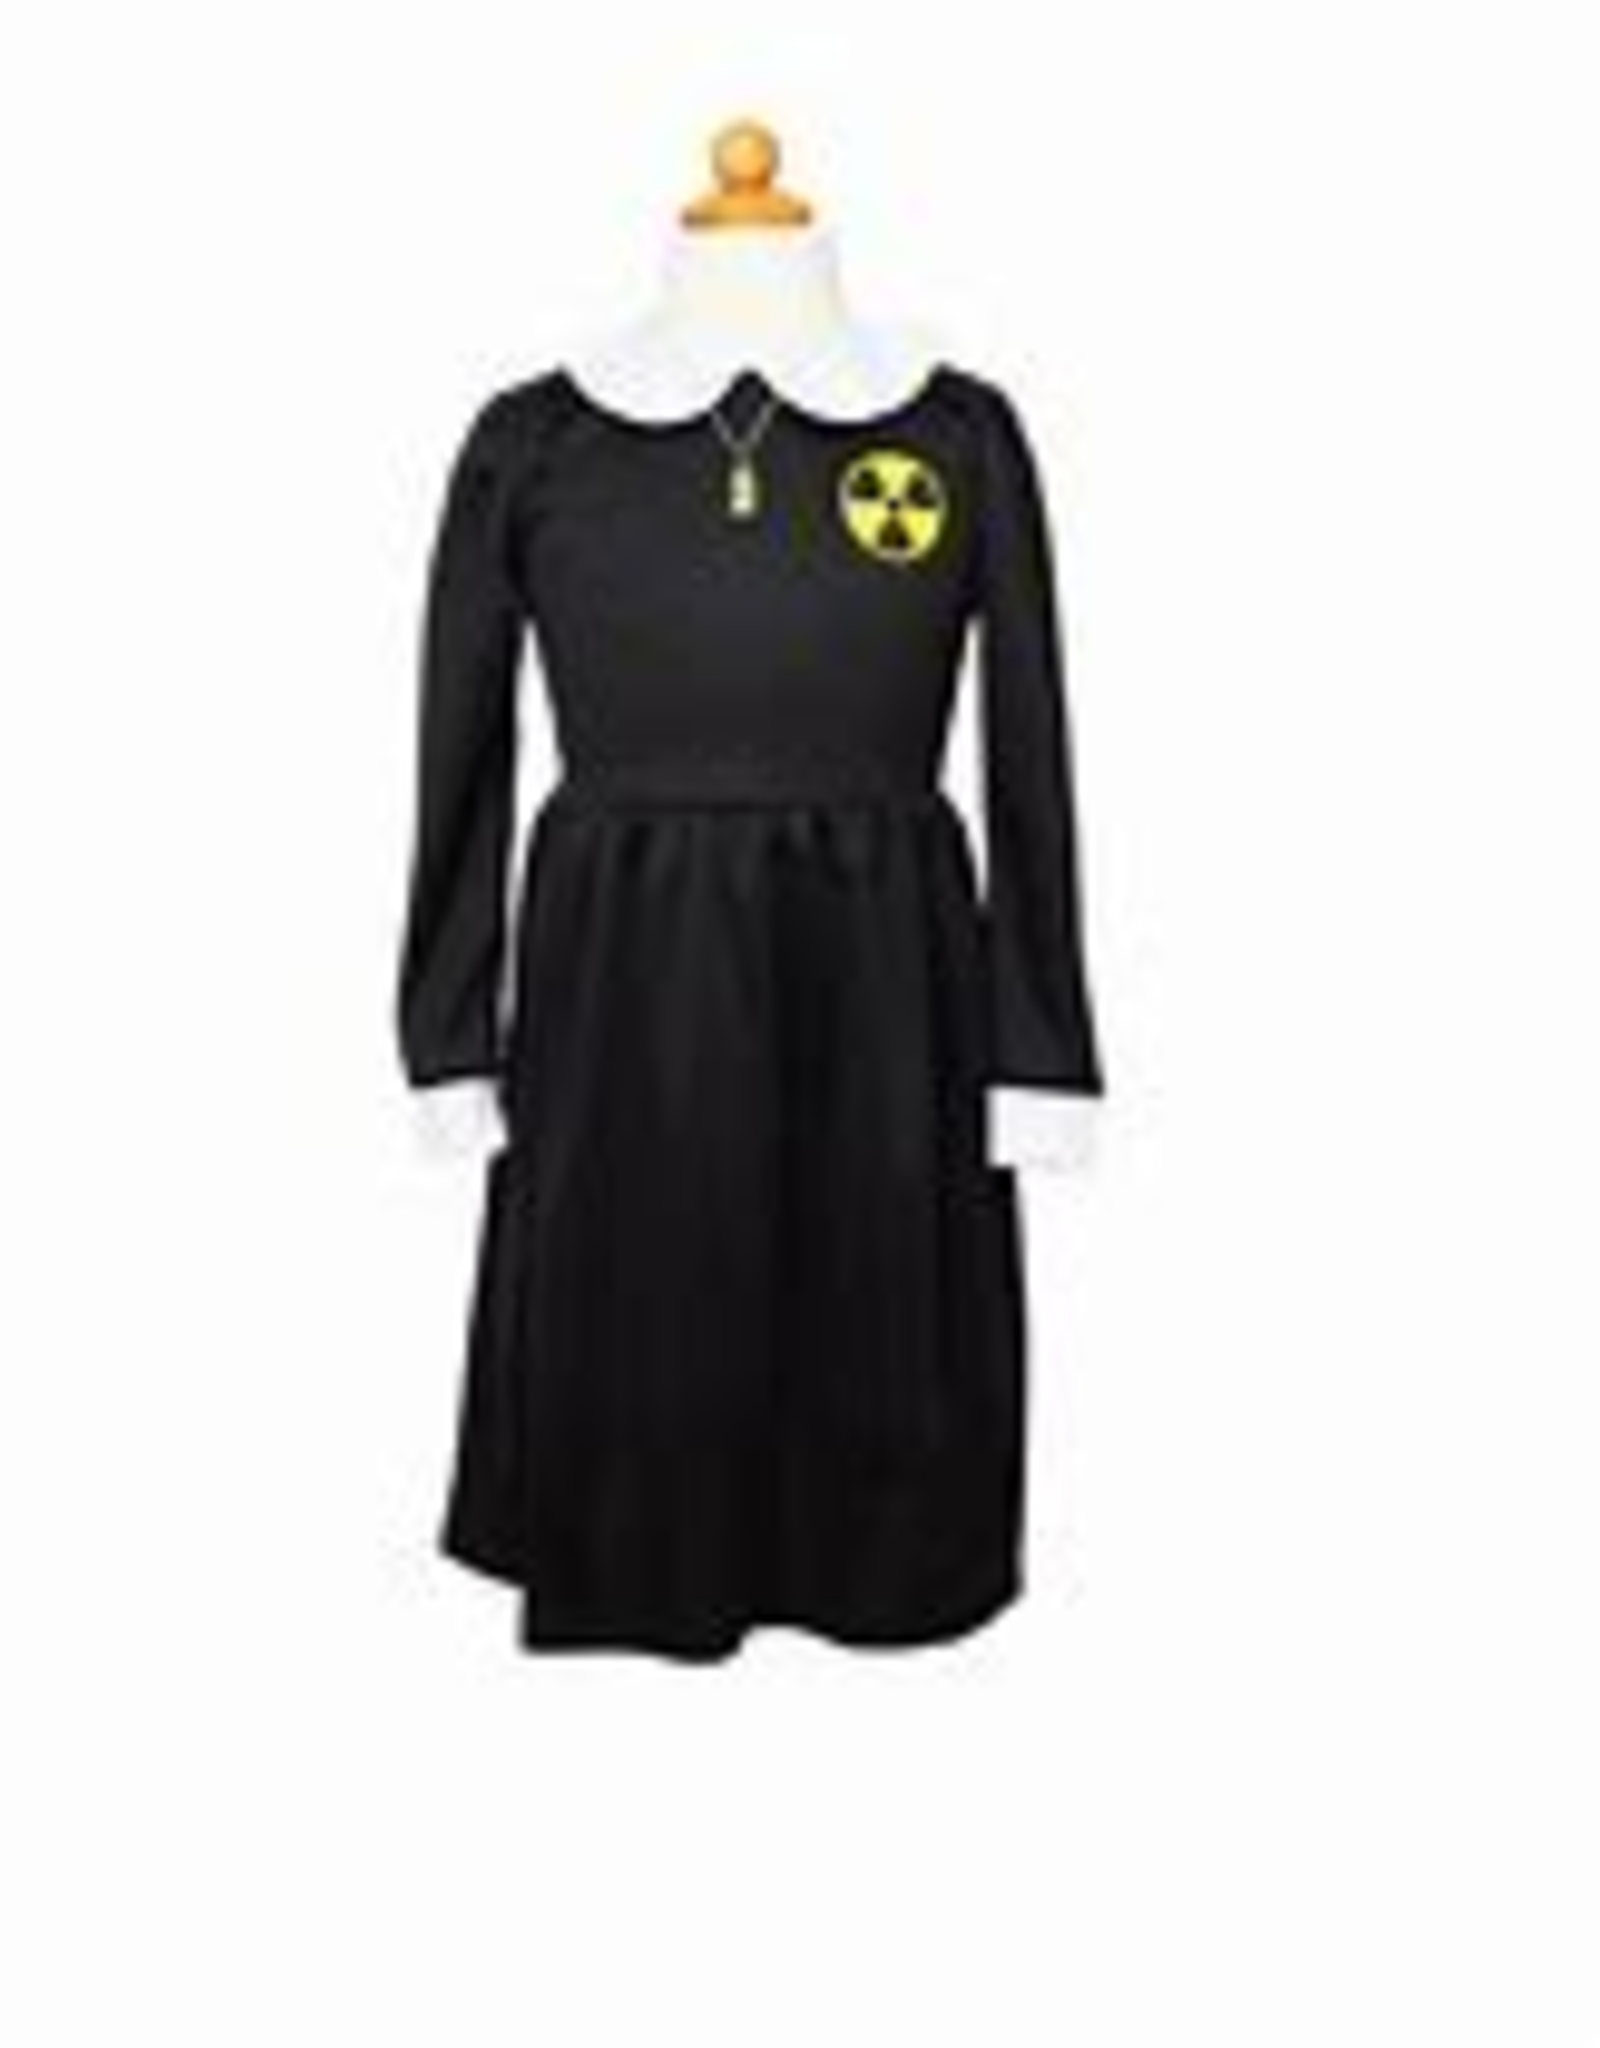 CREATIVE EDUCATION OF CANADA / GREAT PRETENDERS MARIE THE SCIENTIST SET, DRESS COAT & NECKLACE SIZE 5-6